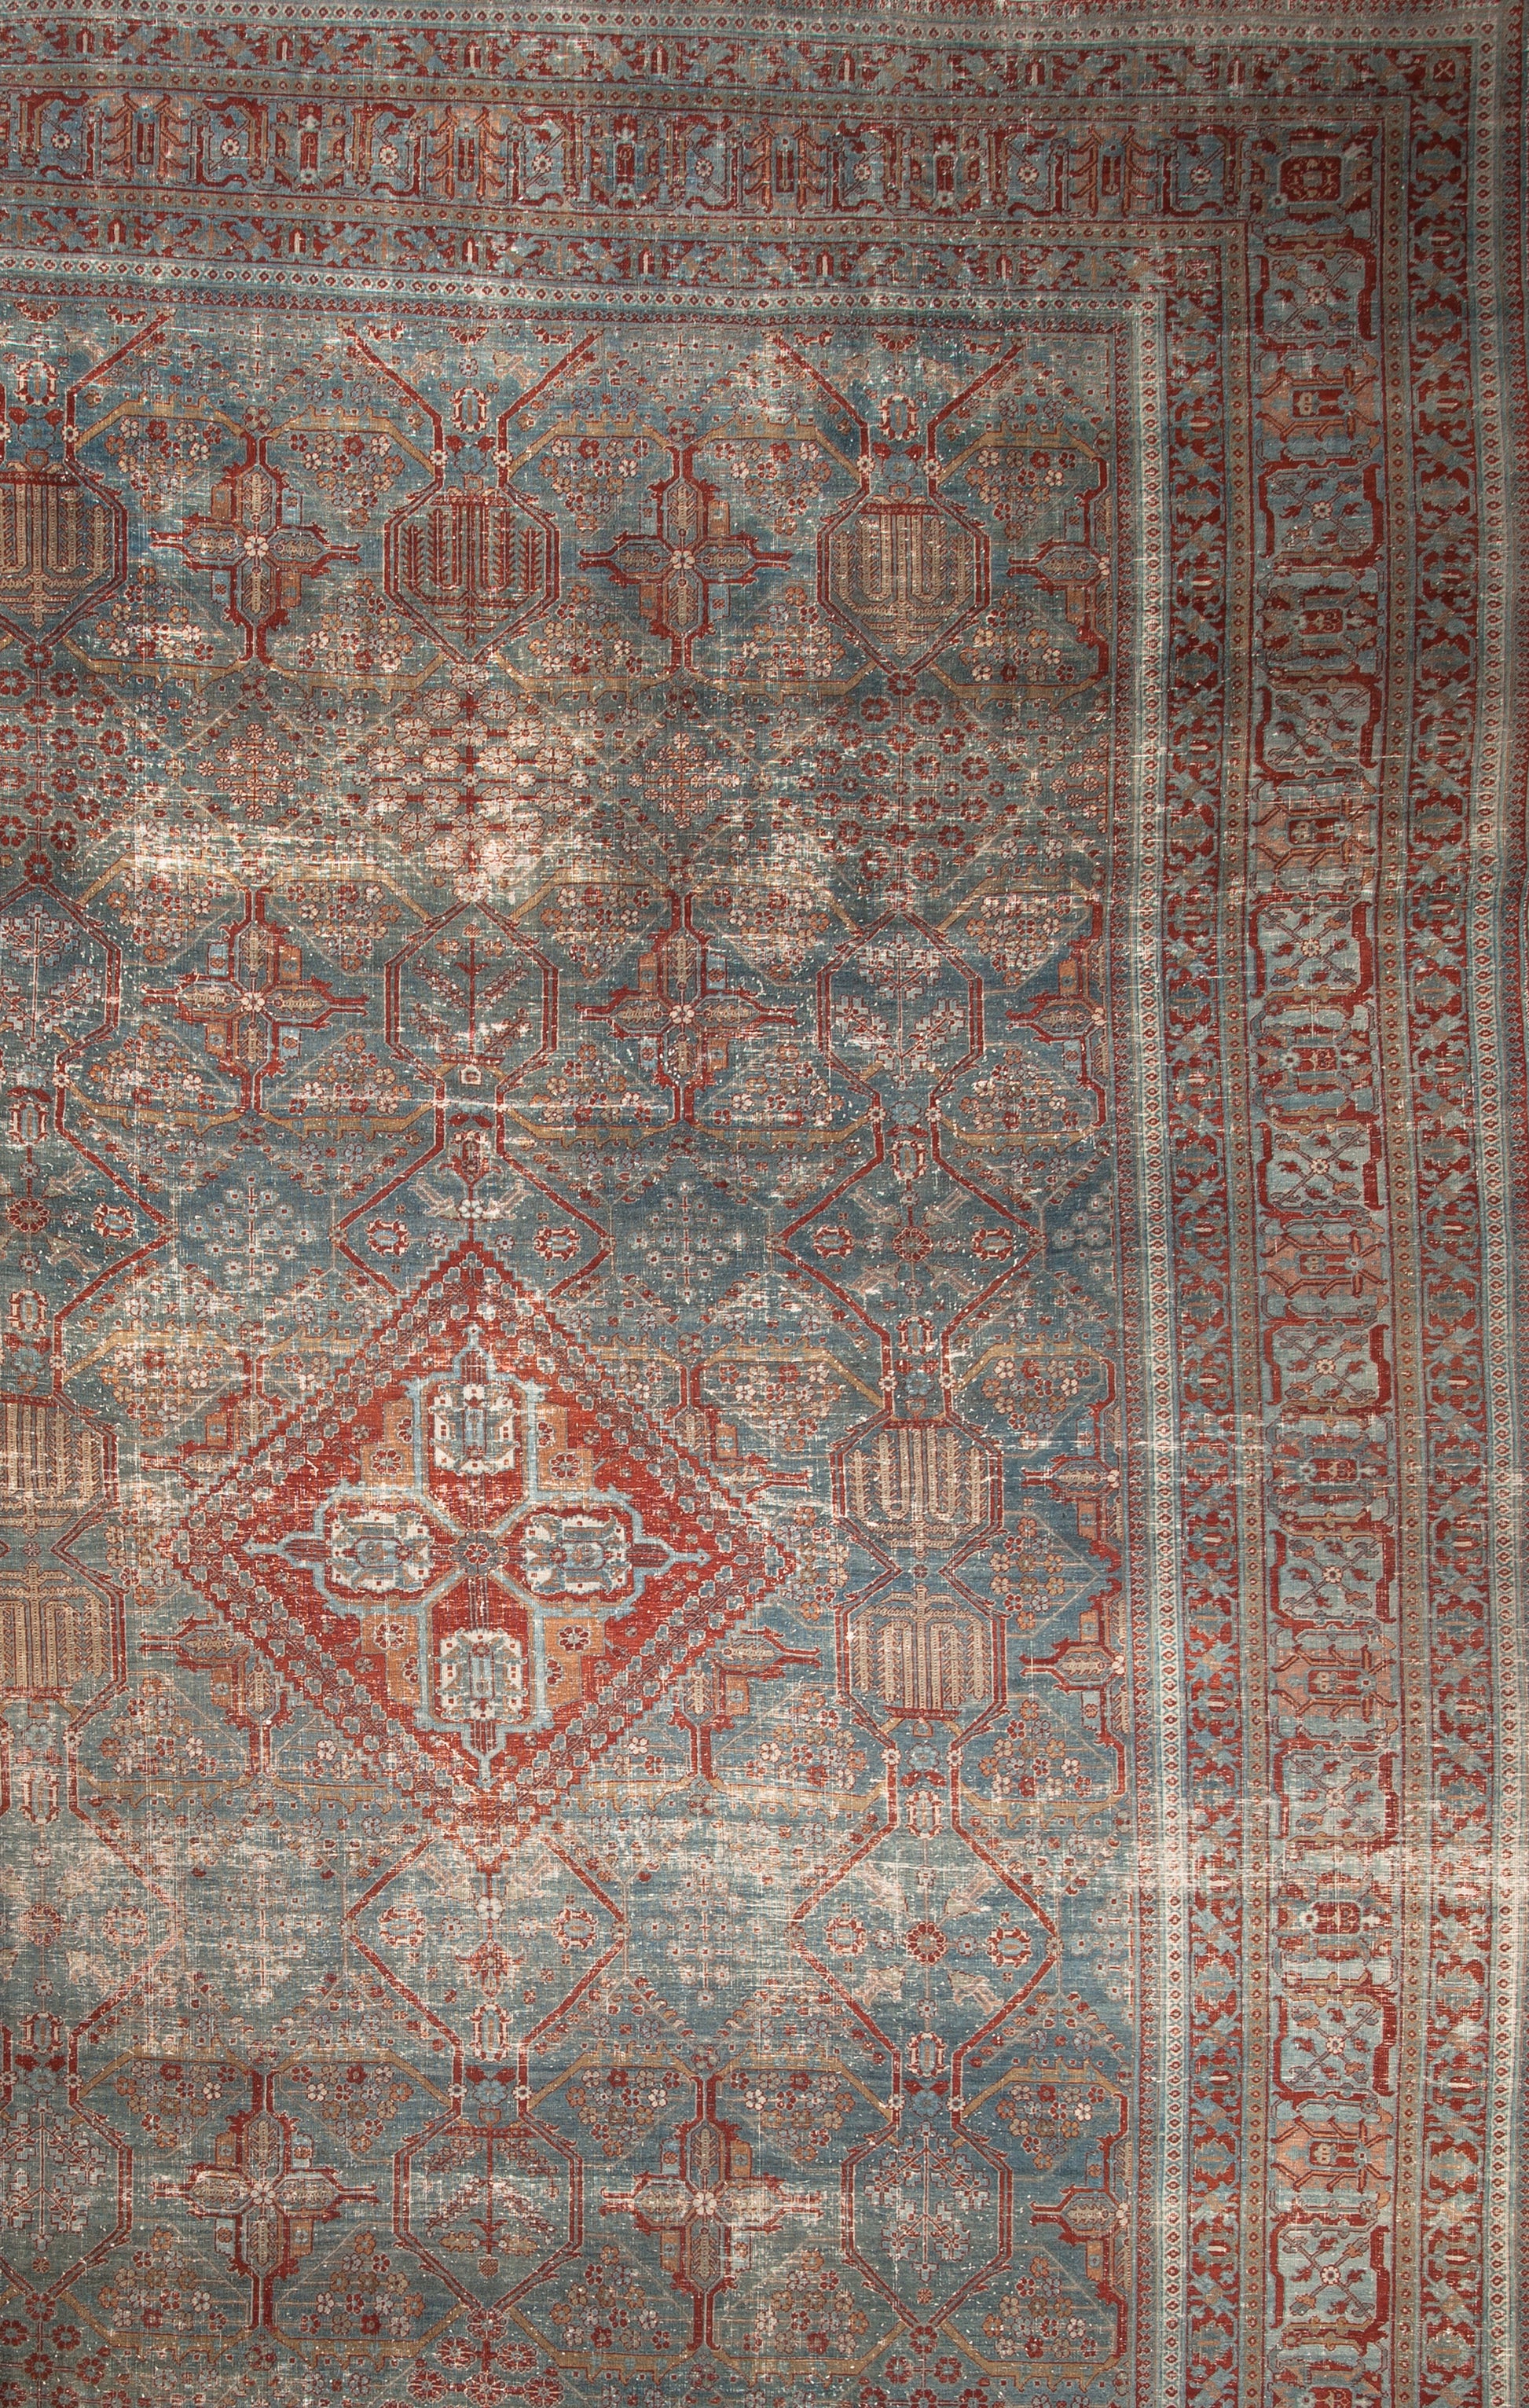 The top right corner has a thick frame full of detailed patterns in blue and red.